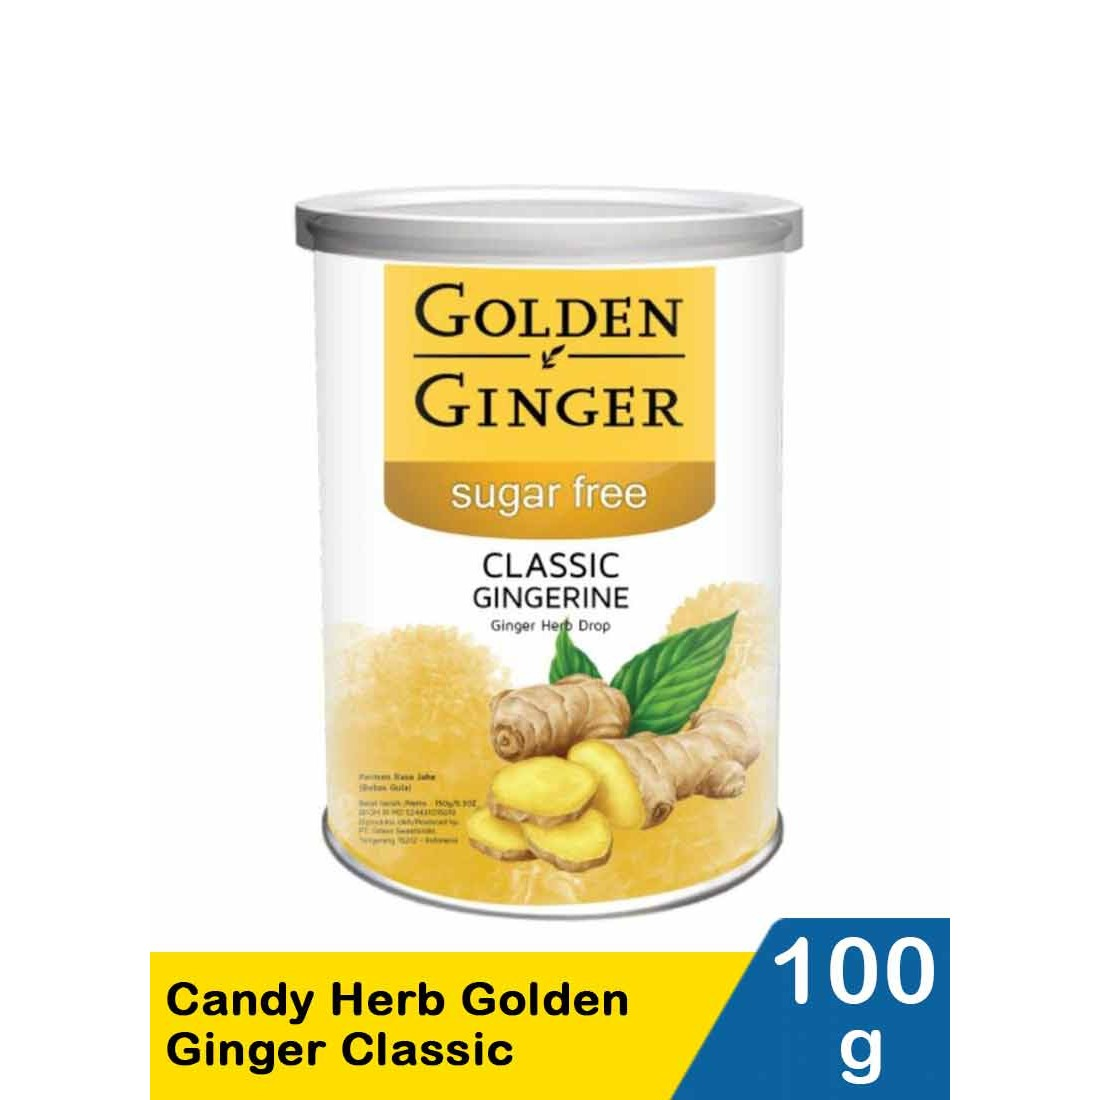 Sunny Ville 100g Candy Herb Golden Ginger Classic